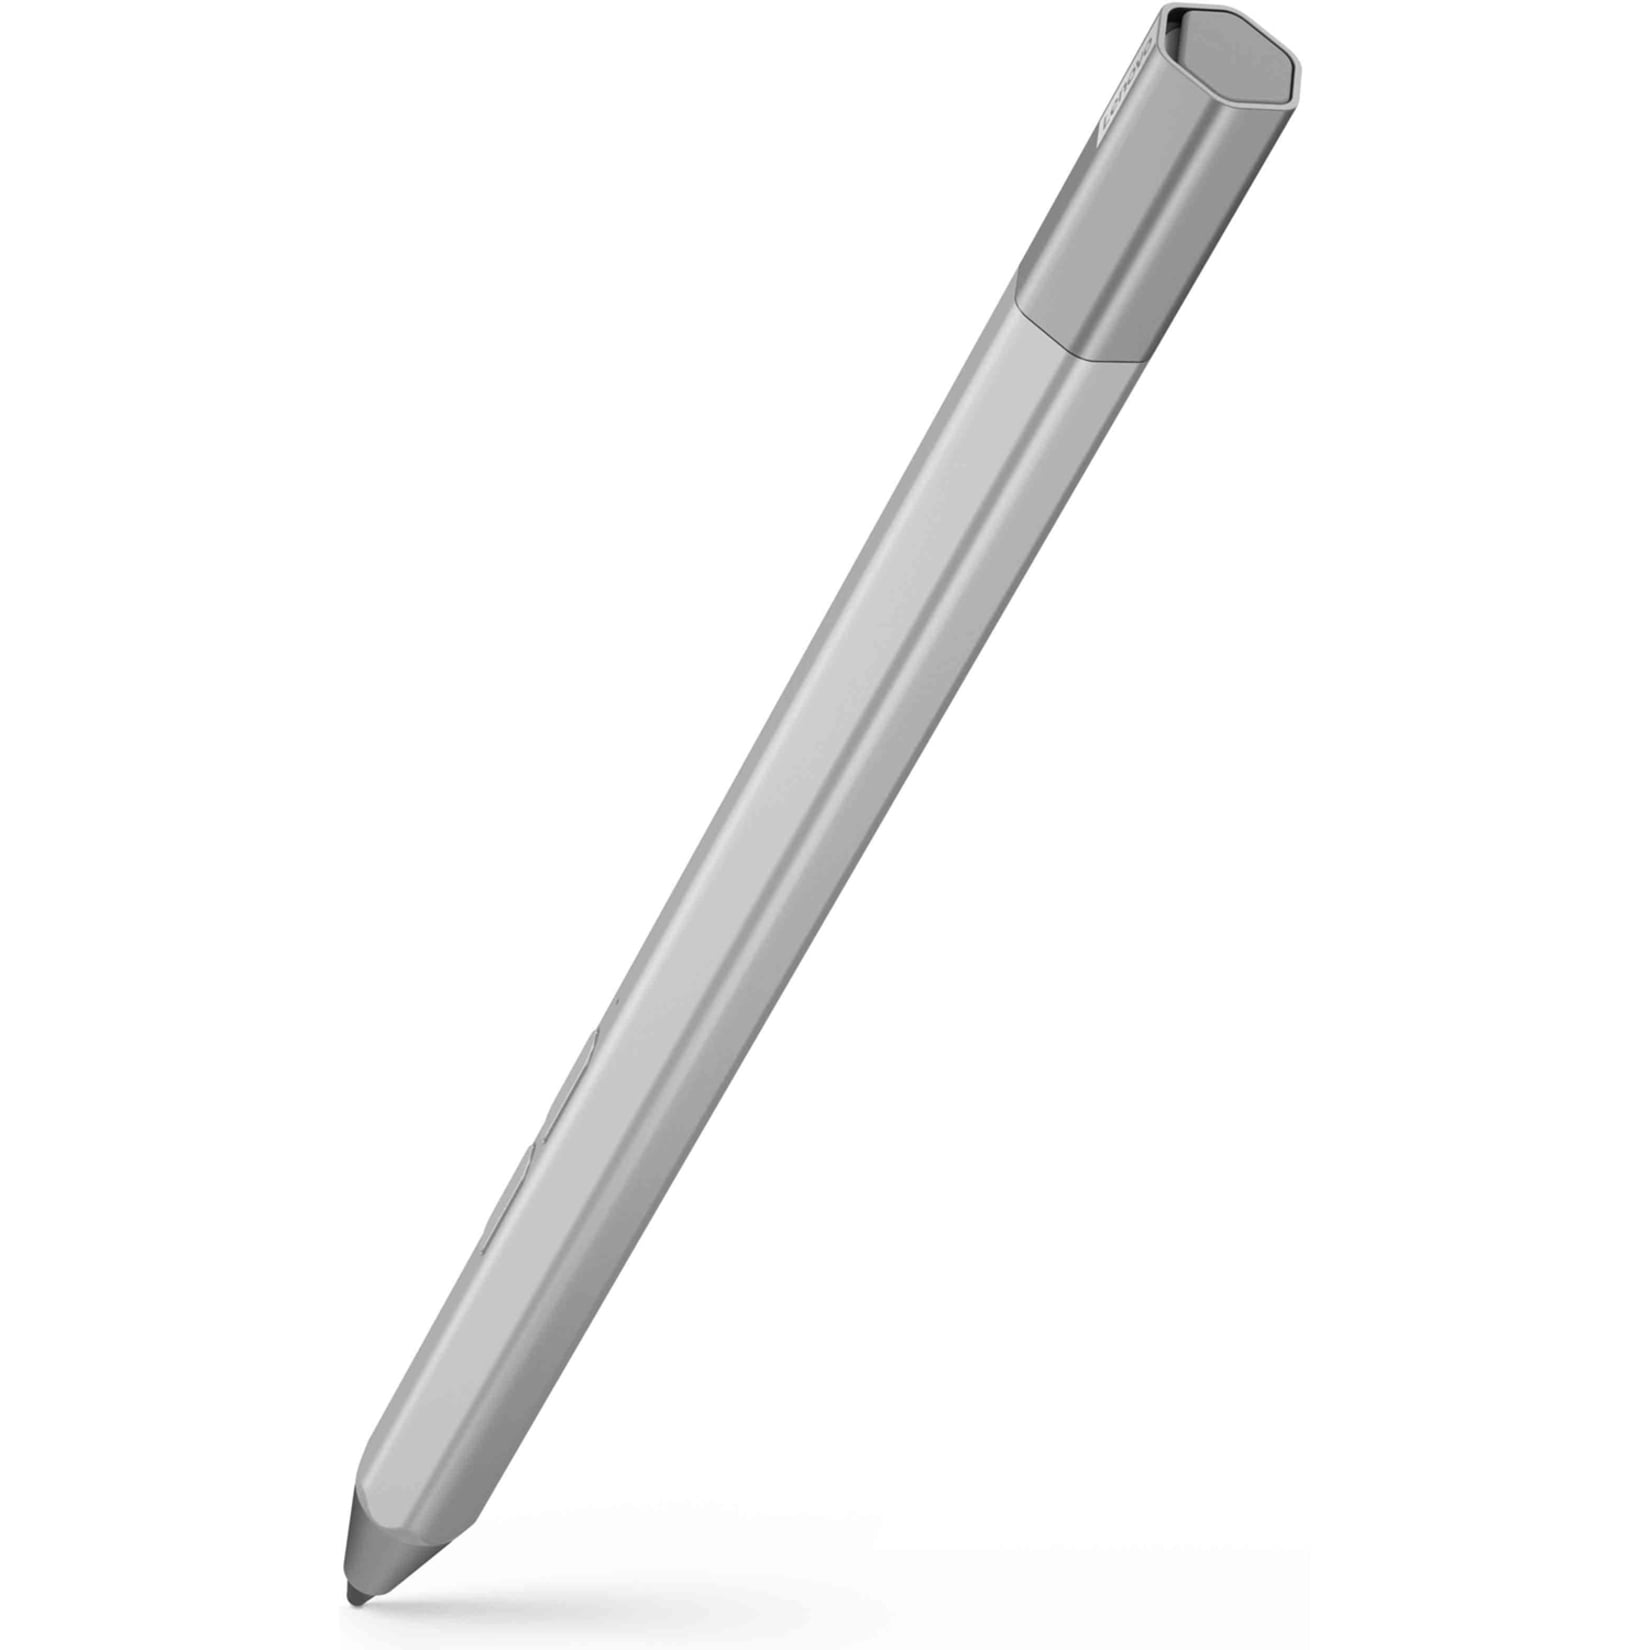 Lenovo Precision Pen 2 (Laptop) - Overview and Service Parts - Lenovo  Support HN